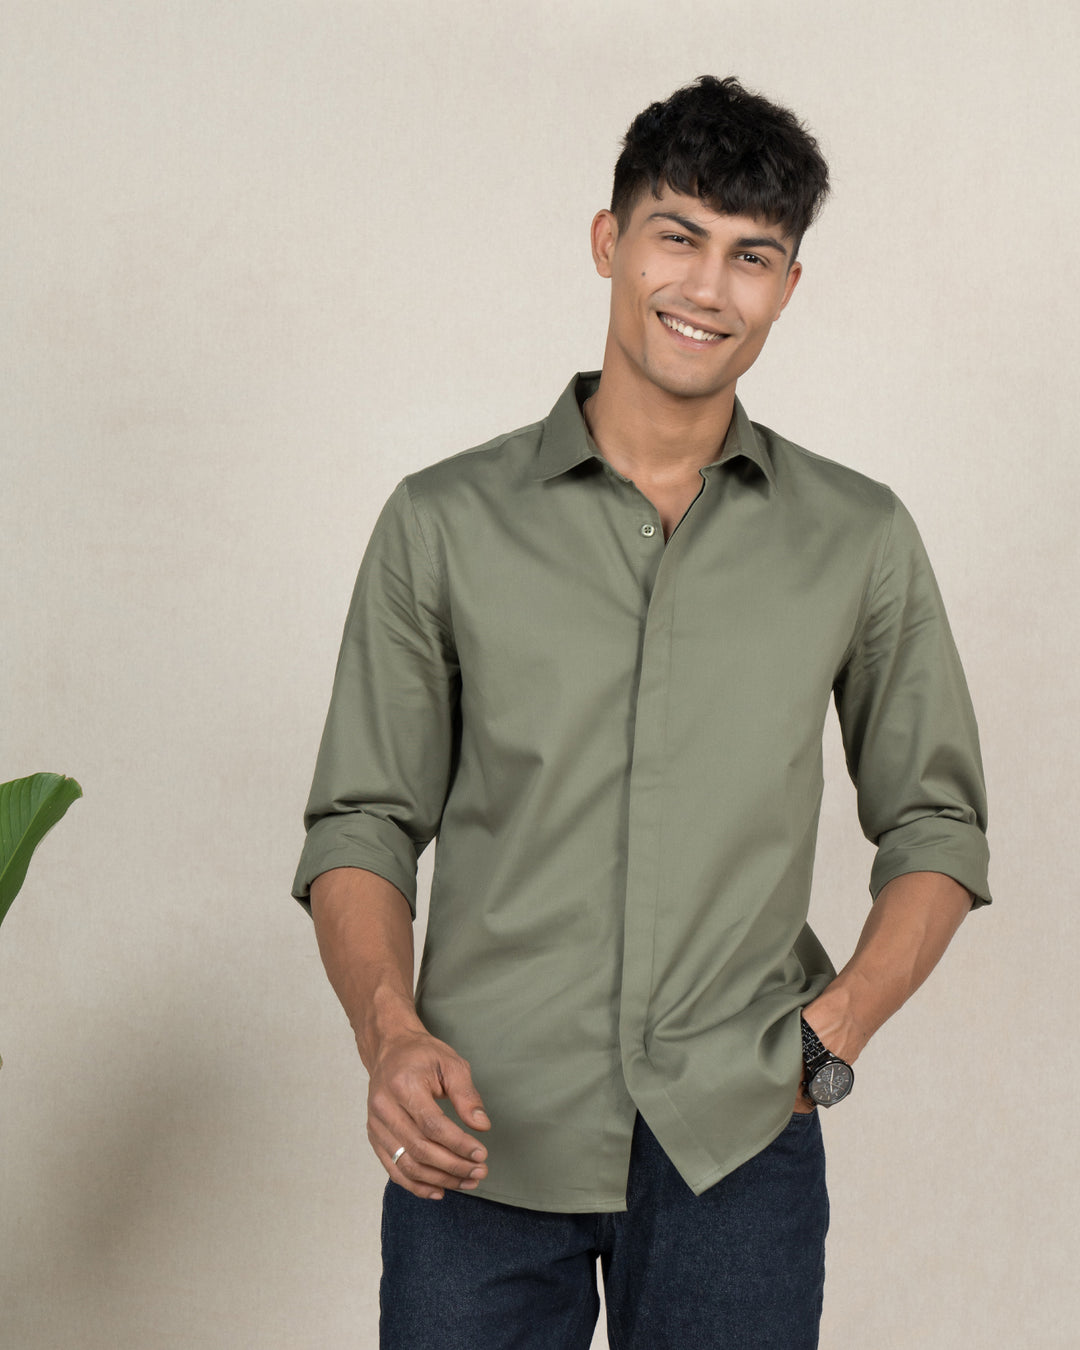 A young person with short dark hair is smiling, wearing a timeless Dark Sage - Classic Shirt made from premium cotton that offers luxury softness. Their sleeves are rolled up, and they pair it with dark jeans. With their right hand in their pocket, they stand against a neutral background with a small green plant to the left.